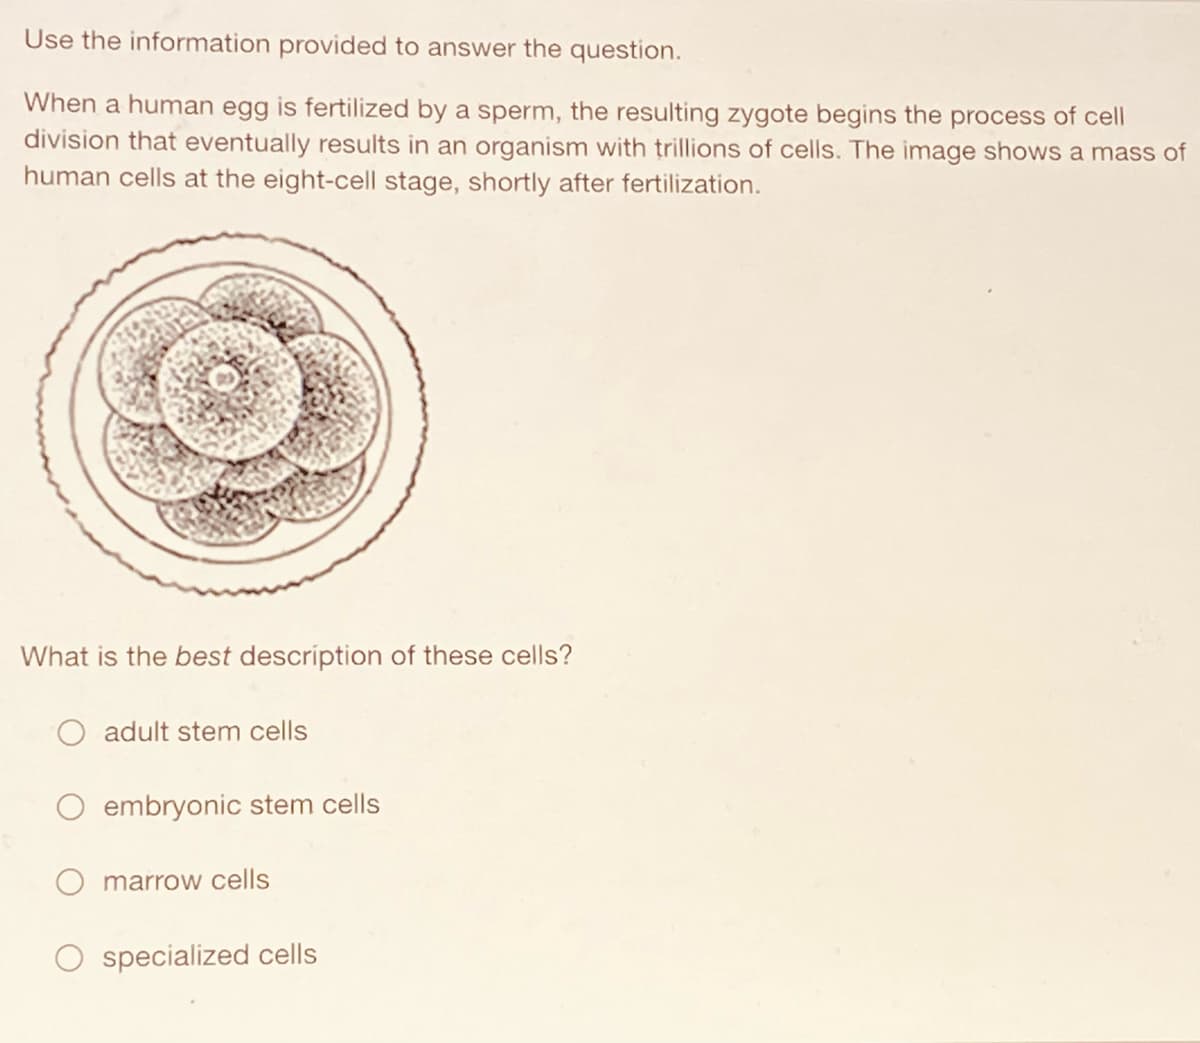 Use the information provided to answer the question.
When a human egg is fertilized by a sperm, the resulting zygote begins the process of cell
division that eventually results in an organism with trillions of cells. The image shows a mass of
human cells at the eight-cell stage, shortly after fertilization.
What is the best description of these cells?
adult stem cells
O embryonic stem cells
marrow cells
specialized cells
